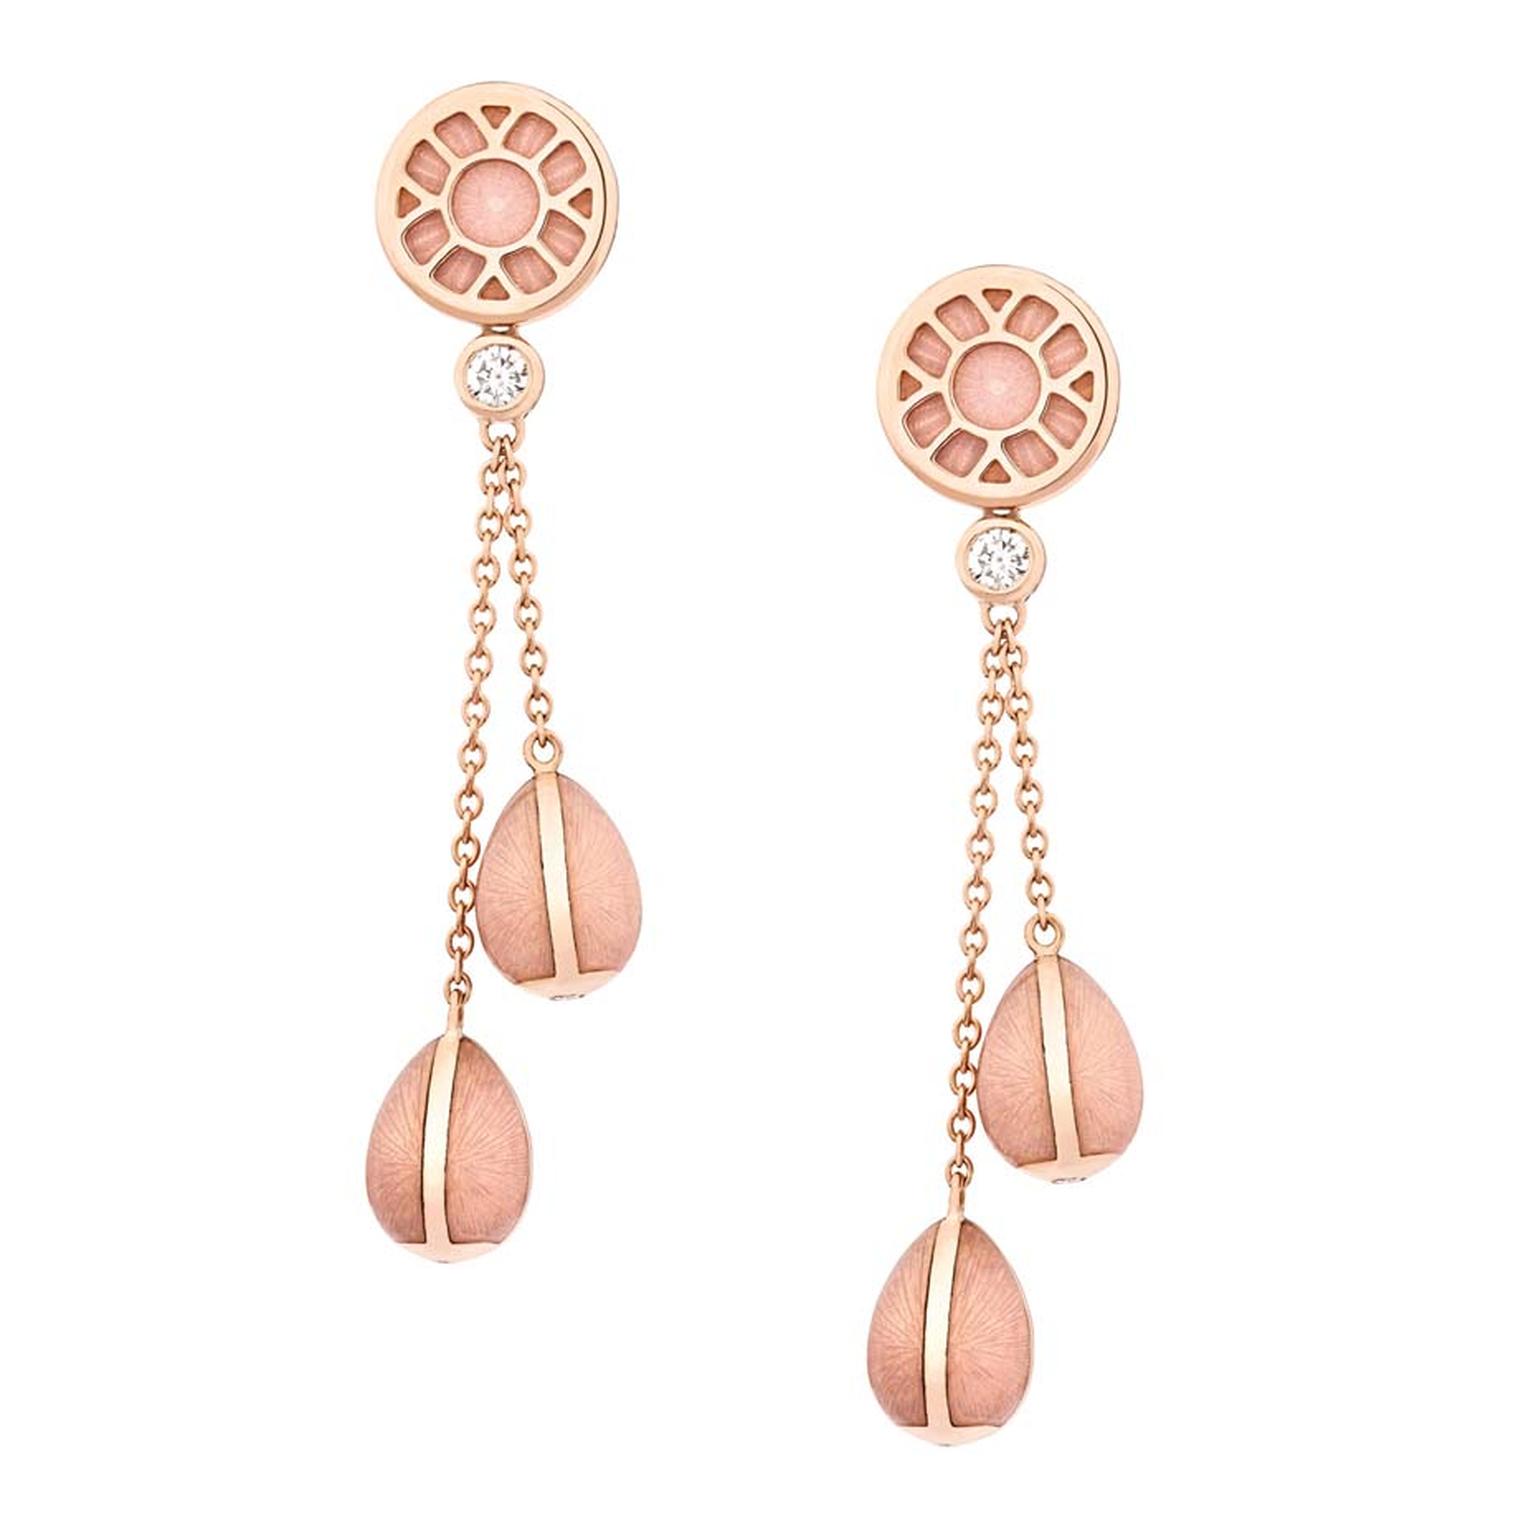 Fabergé draws inspiration from its original high jewelry masterpieces for its Heritage collection, which includes this pair of rose gold drop earrings, featuring a duo of Fabergé eggs on each earring.